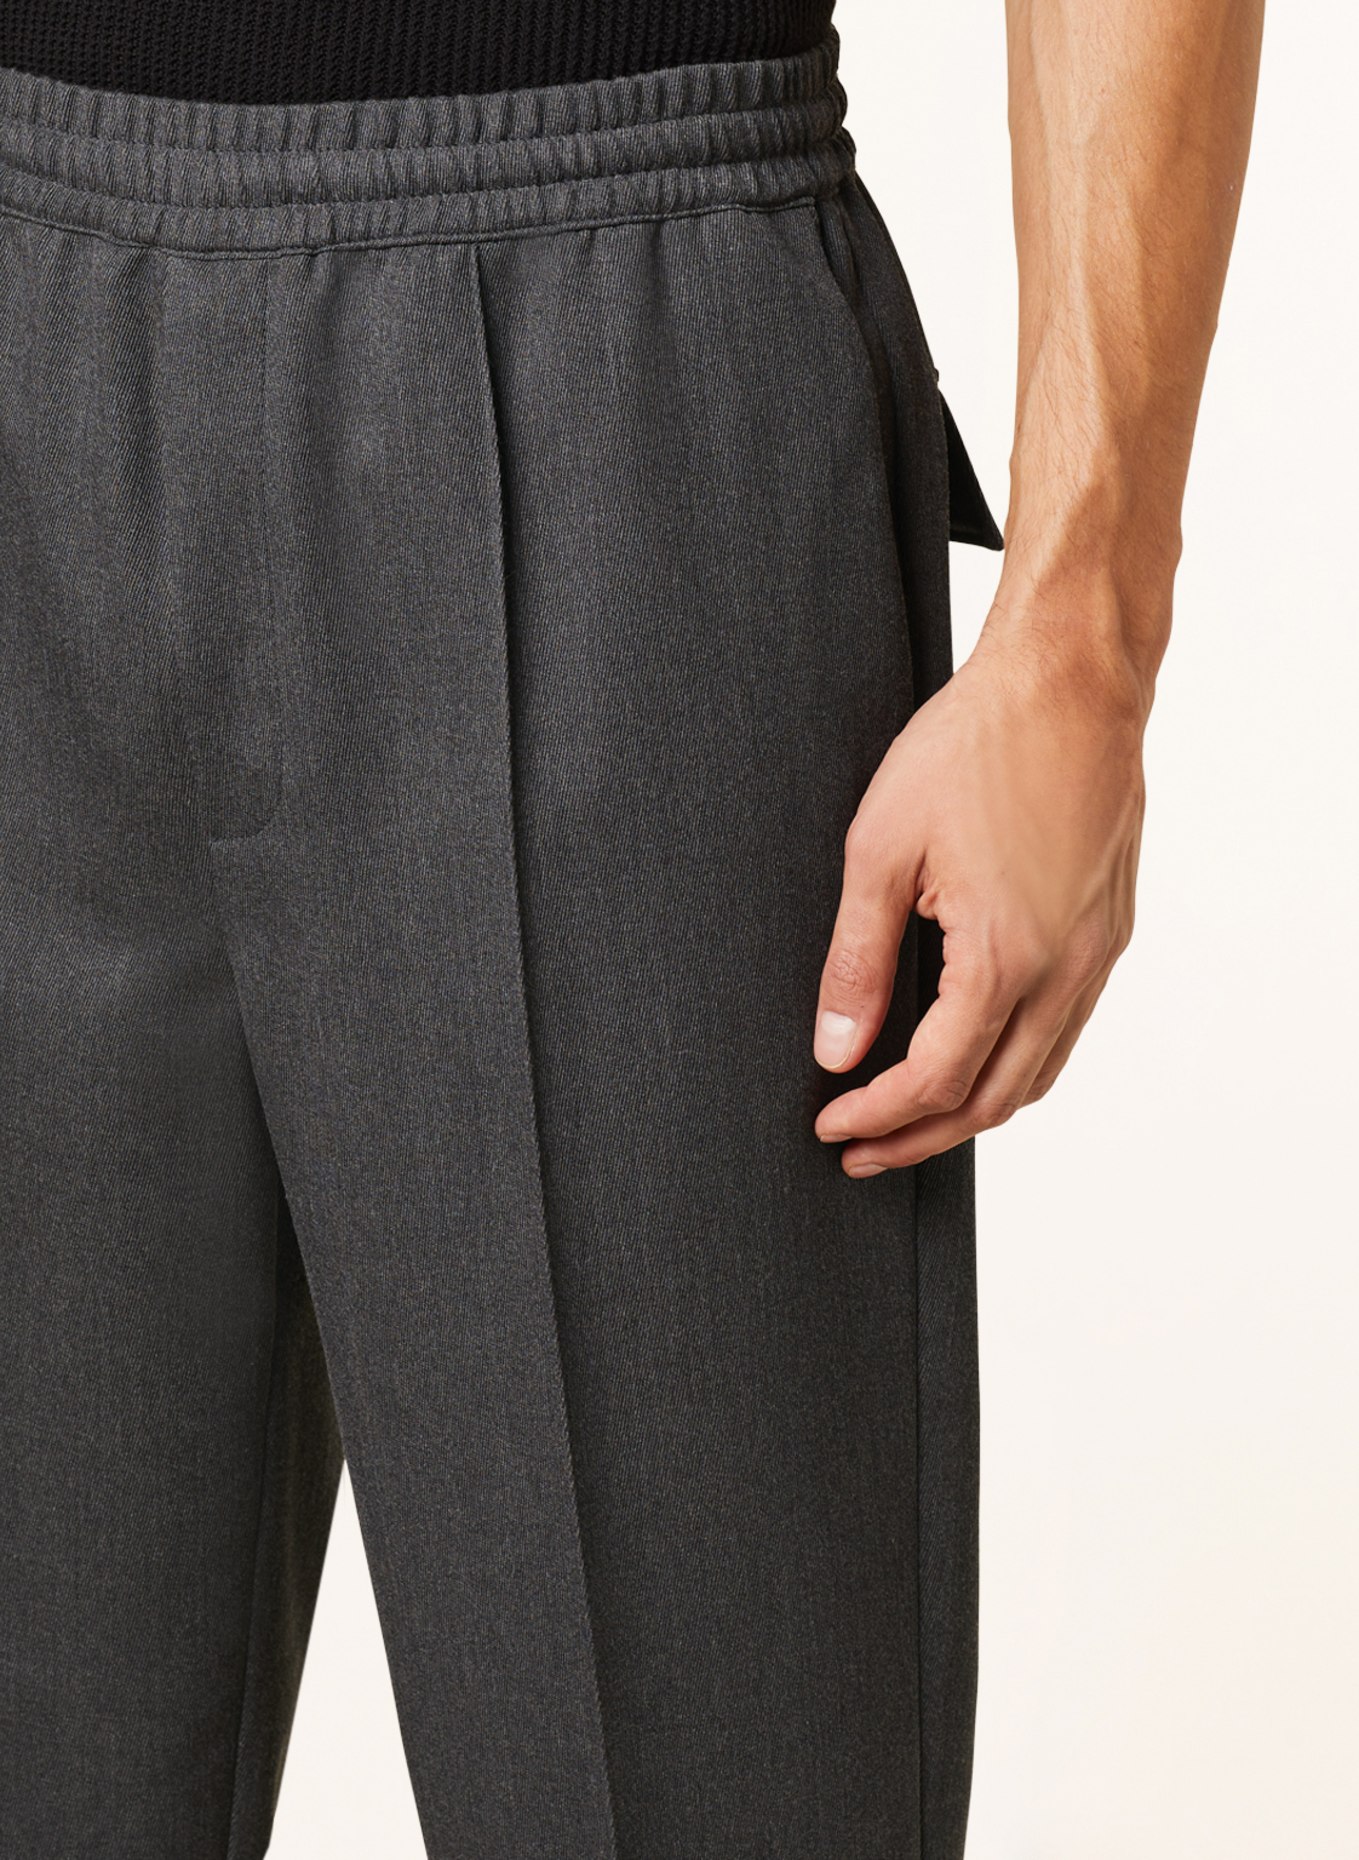 RÓHE Pants in jogger style, Color: GRAY (Image 5)